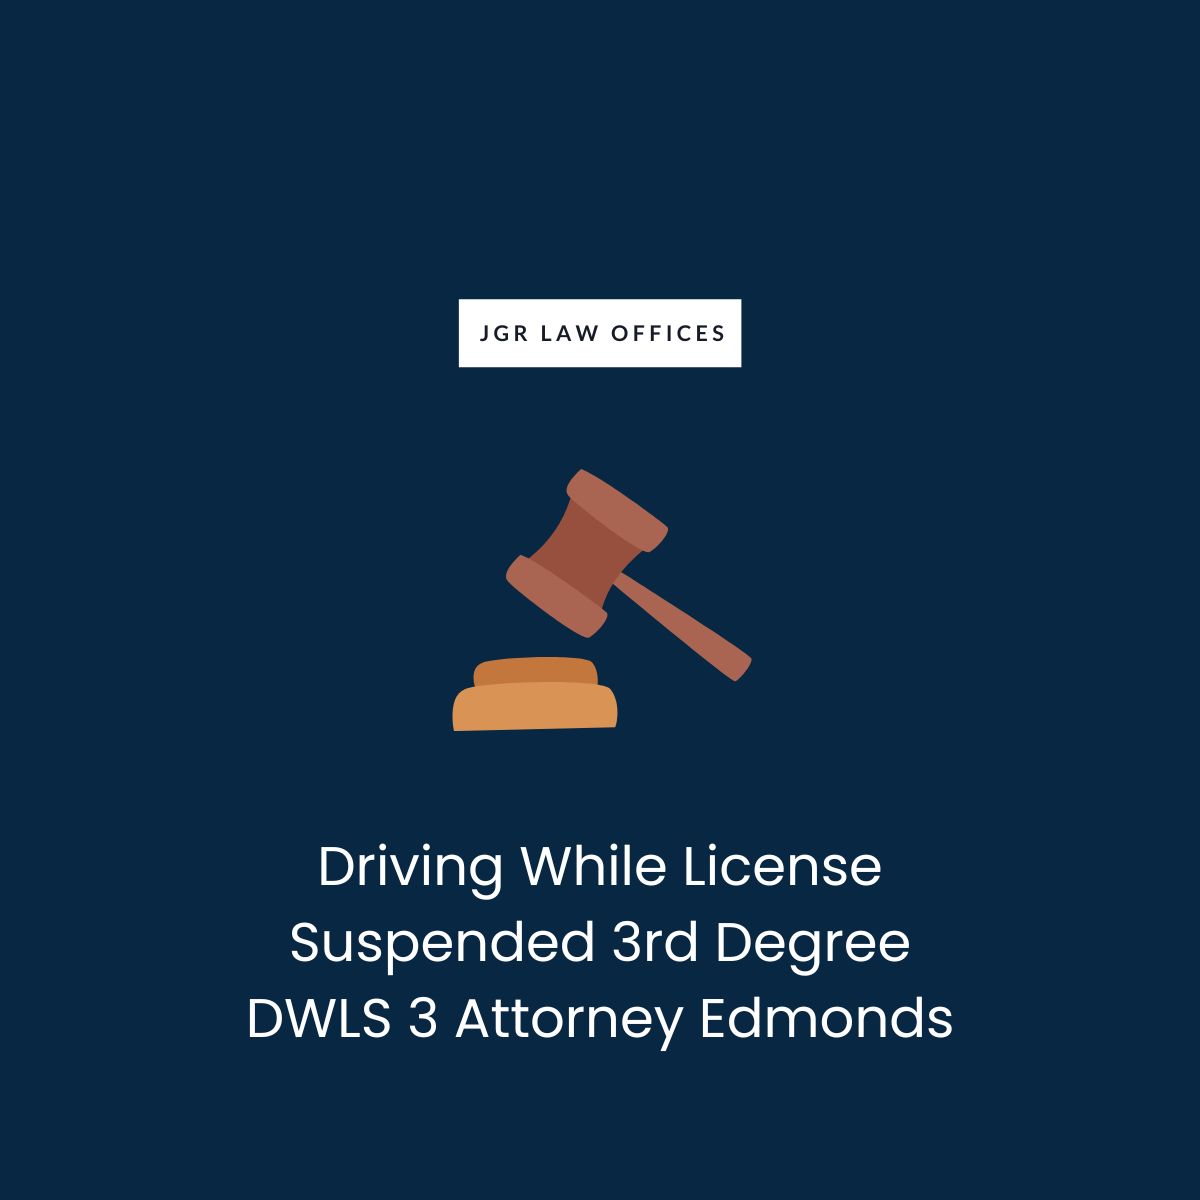 Driving While License Suspended 3rd Degree DWLS 3 Attorney Edmonds